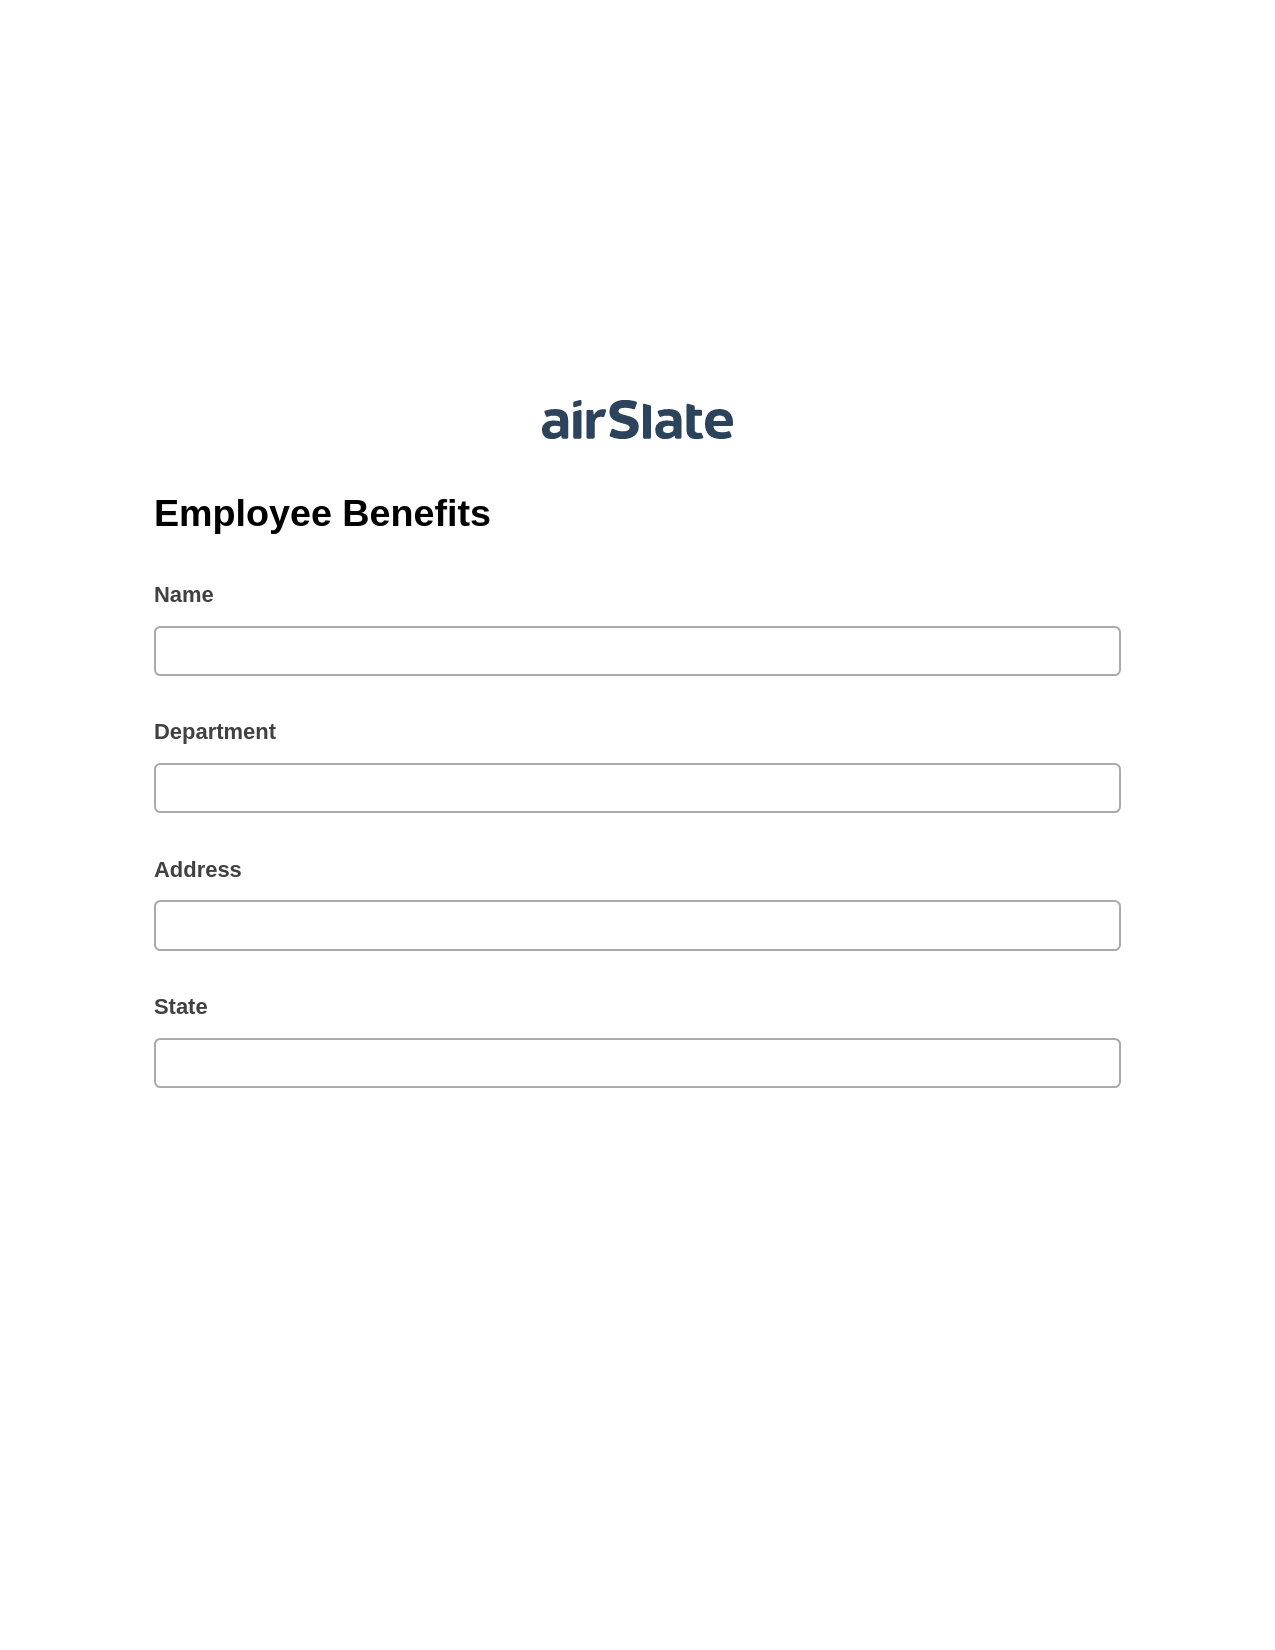 Employee Benefits Pre-fill from MySQL Bot, Revoke Access Bot, Export to Formstack Documents Bot